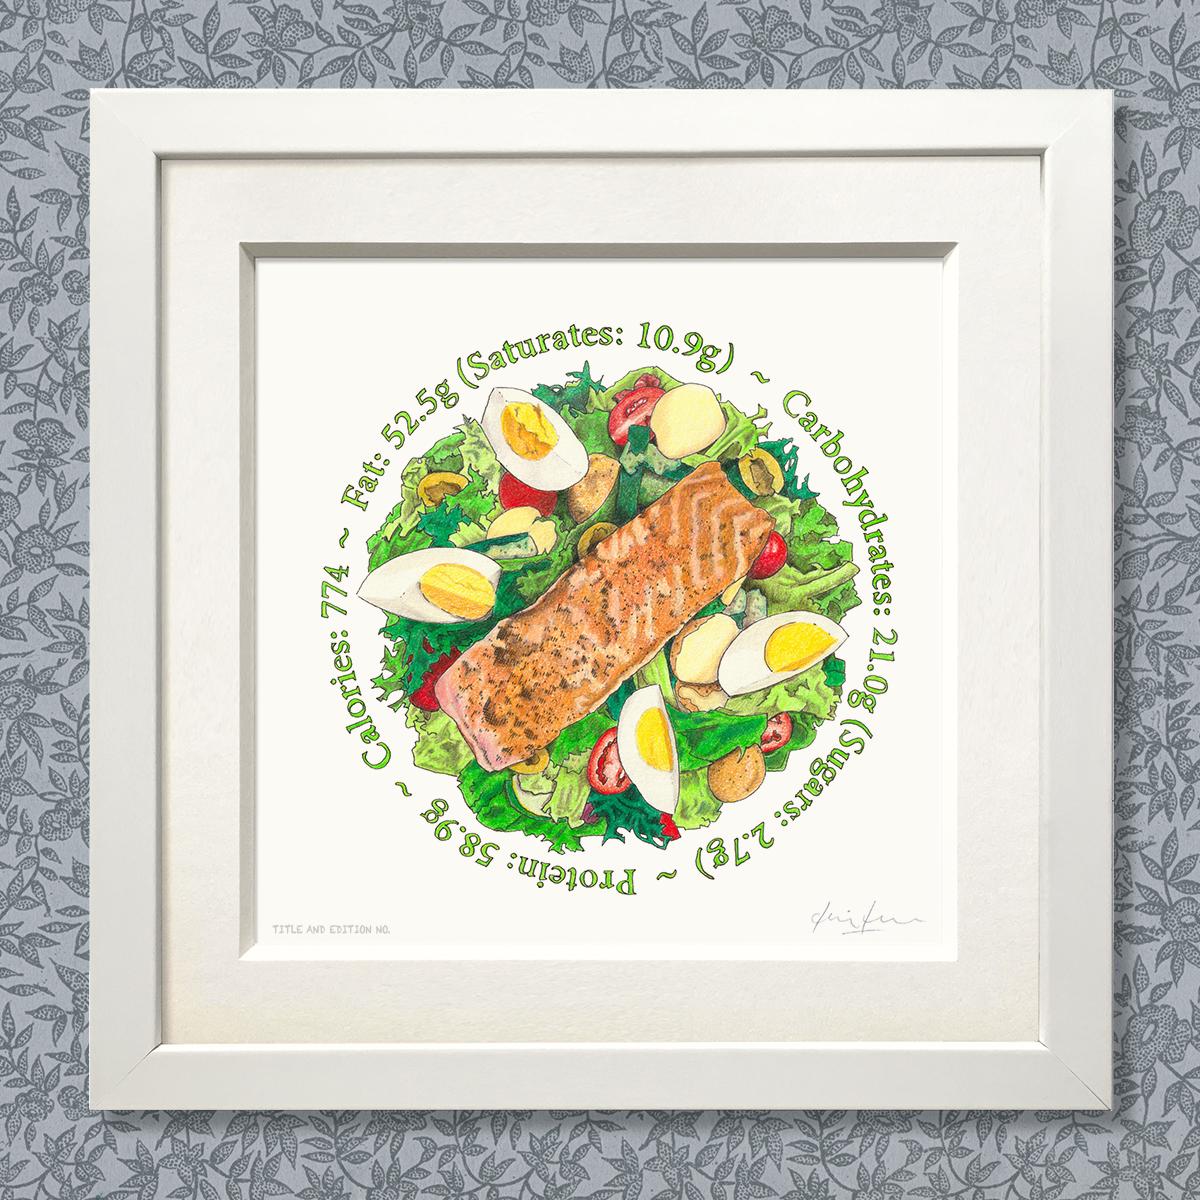 Limited edition print of coloured drawing of a plate of salmon salad, in a white frame.